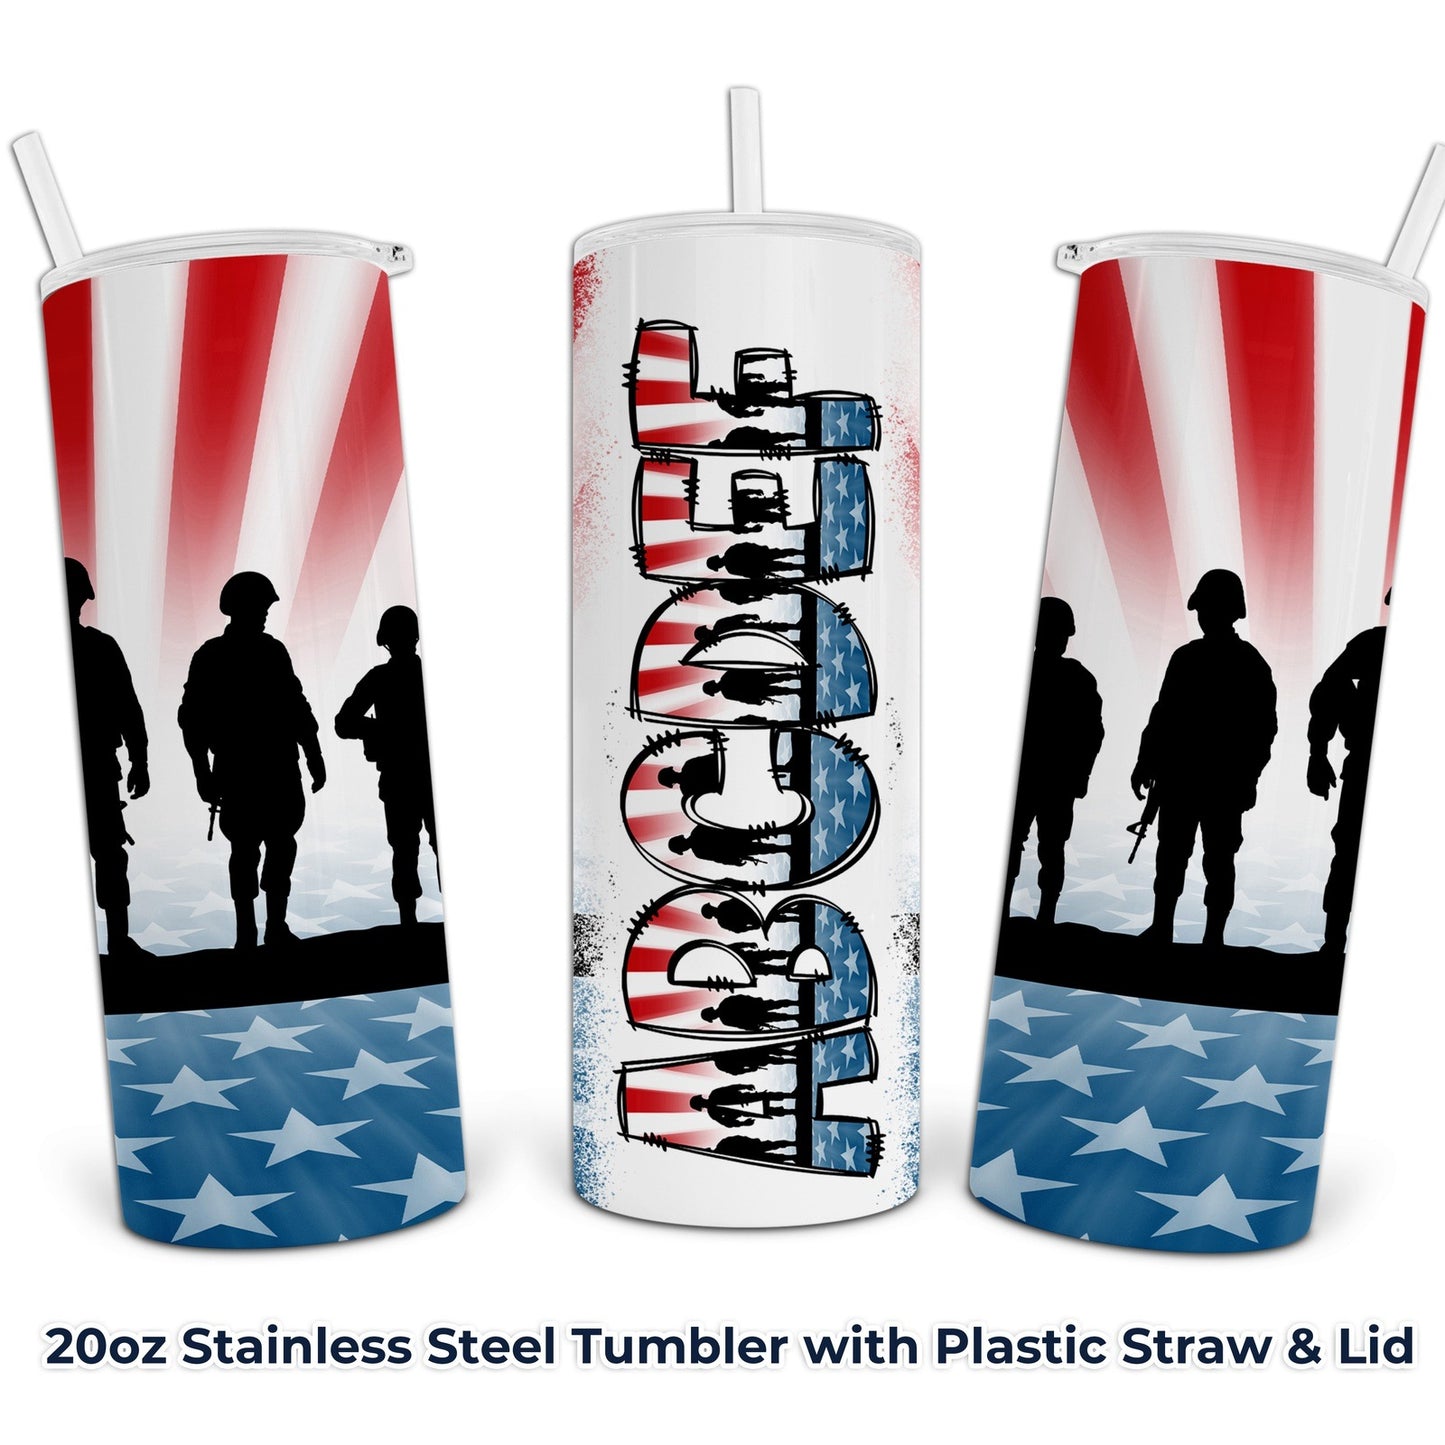 American Soldier - Add Your Name Tumbler - 20oz Stainless Steel Tumbler with Lid and Straw